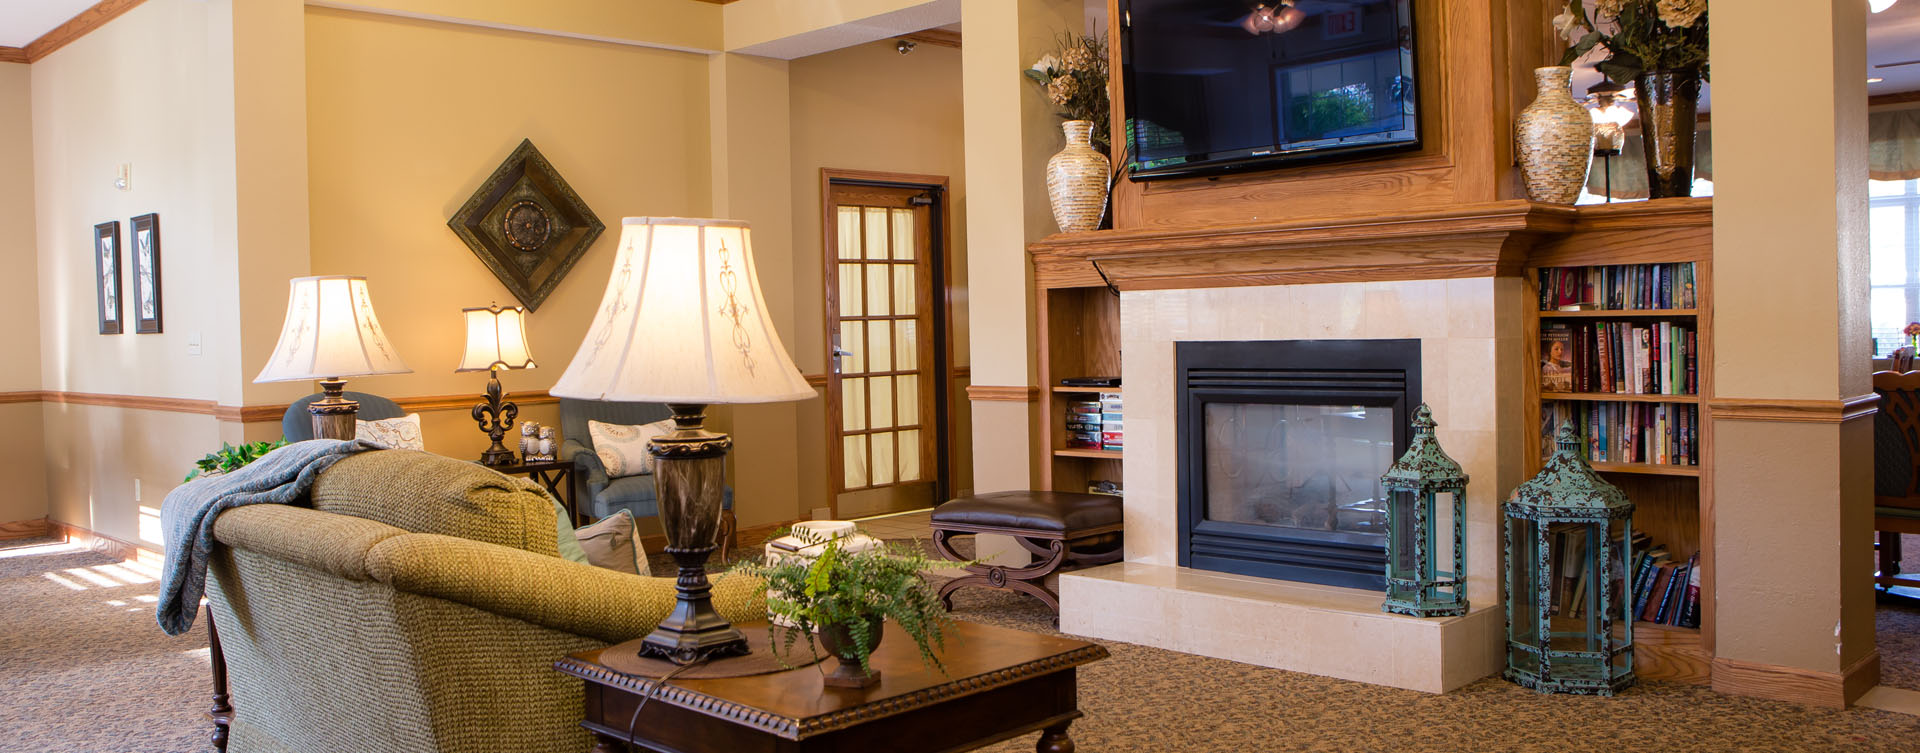 Enjoy a good book in the living room at Bickford of Macomb